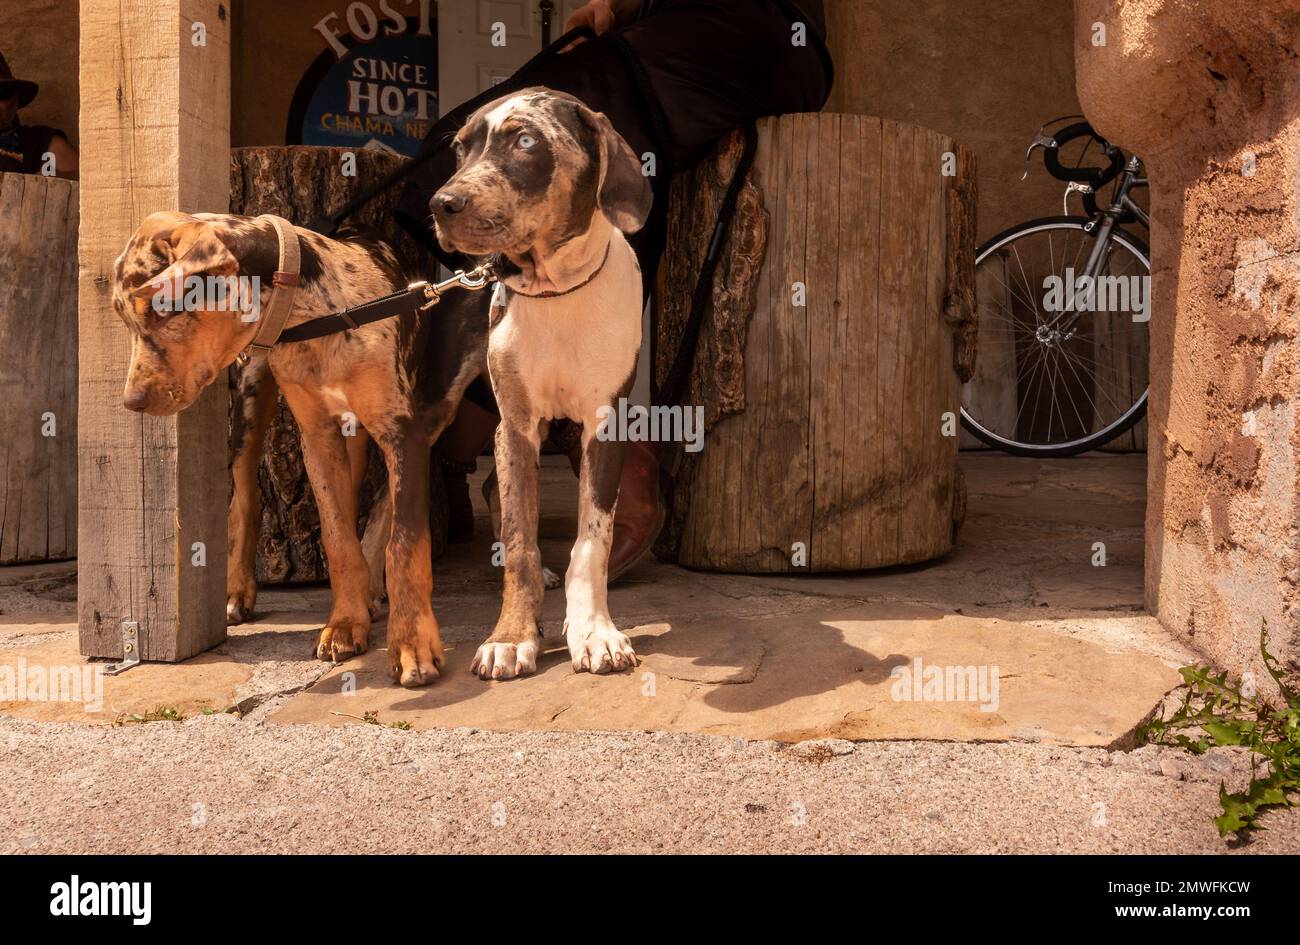 Two young puppies, probably hound dogs, on a leash standing, looking, while their owner sits at an outdoor bar restaurant, Chama, New Mexico, USA. Stock Photo